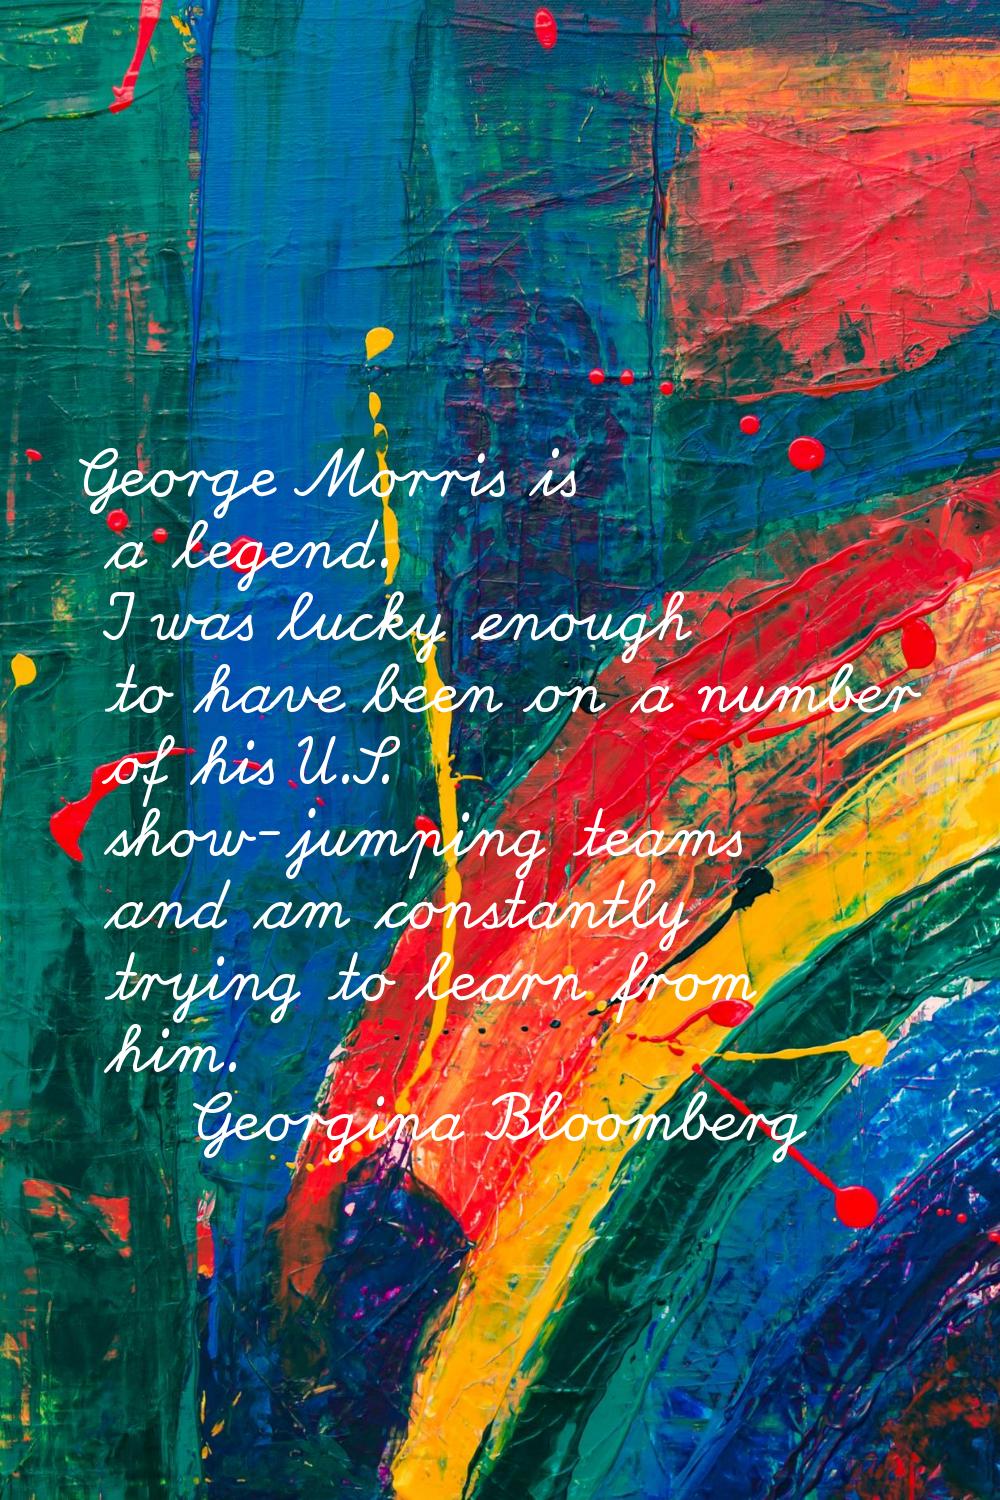 George Morris is a legend. I was lucky enough to have been on a number of his U.S. show-jumping tea